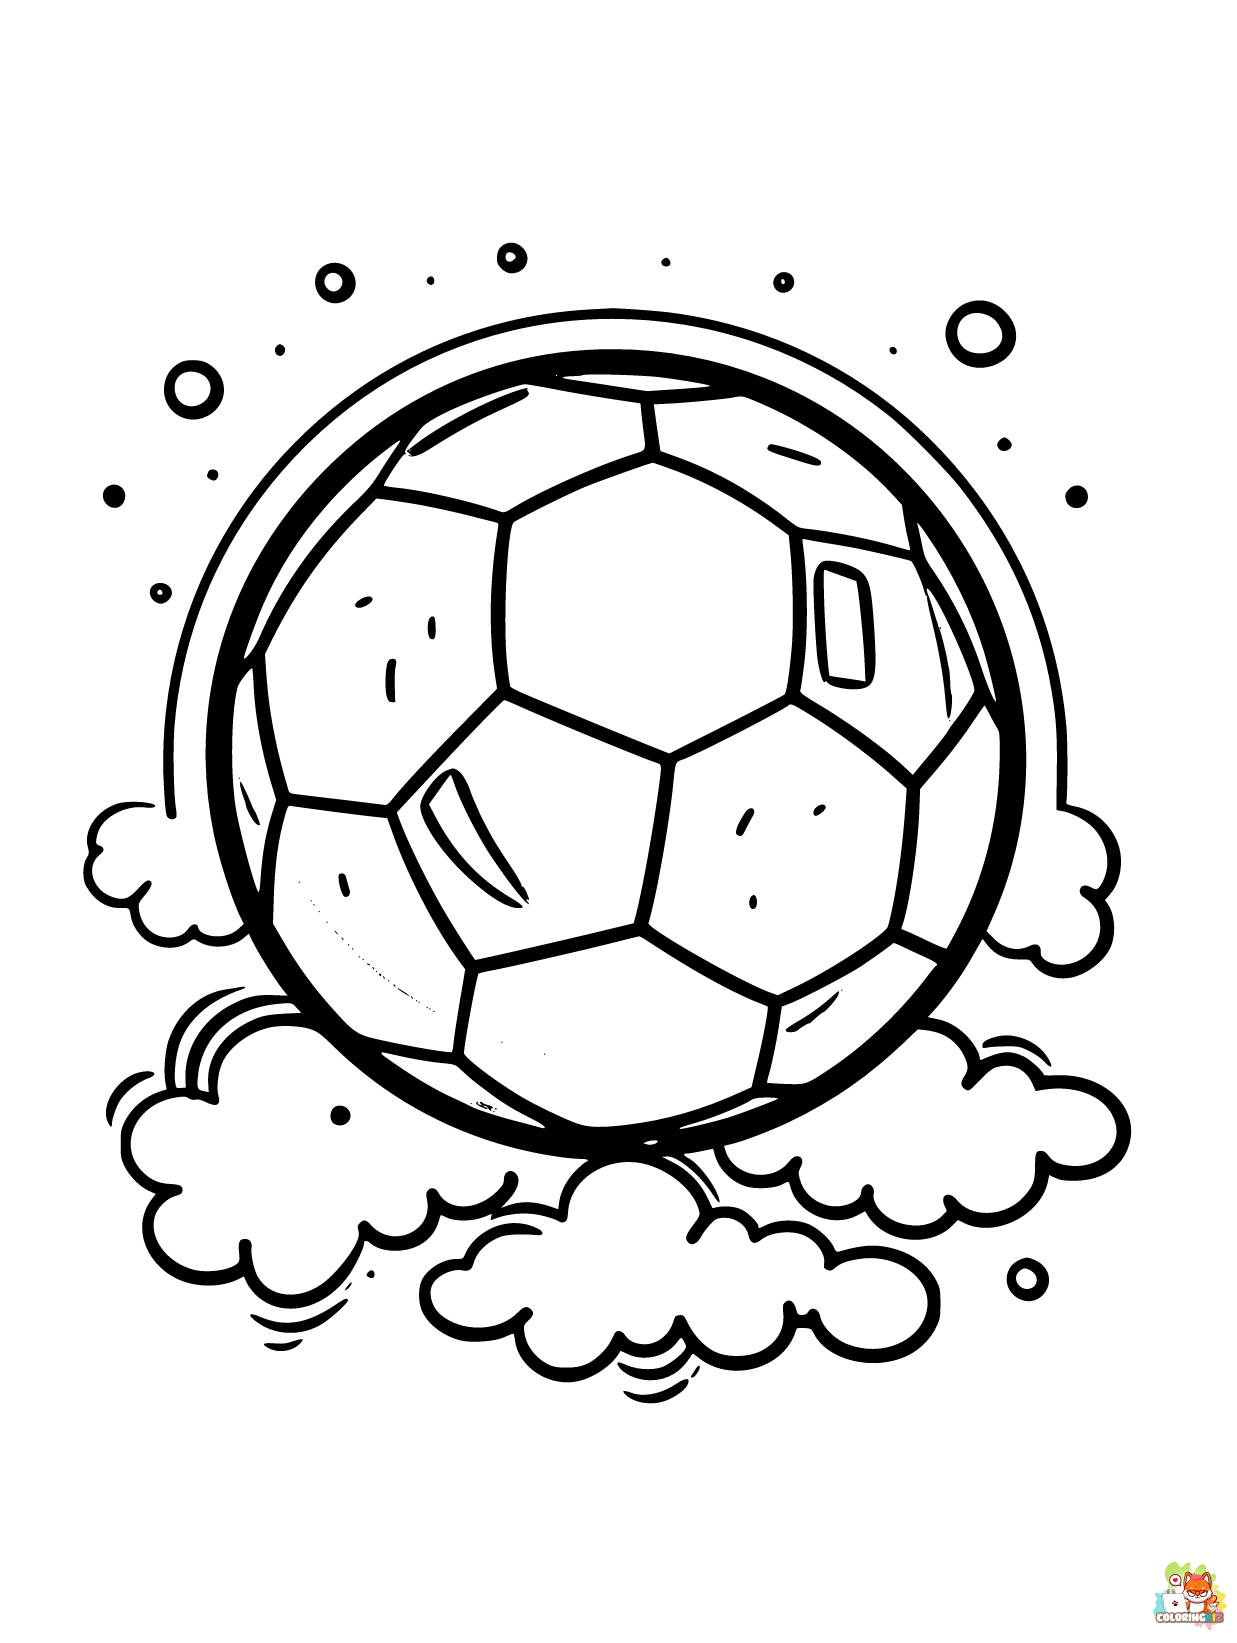 Soccer coloring pages printable